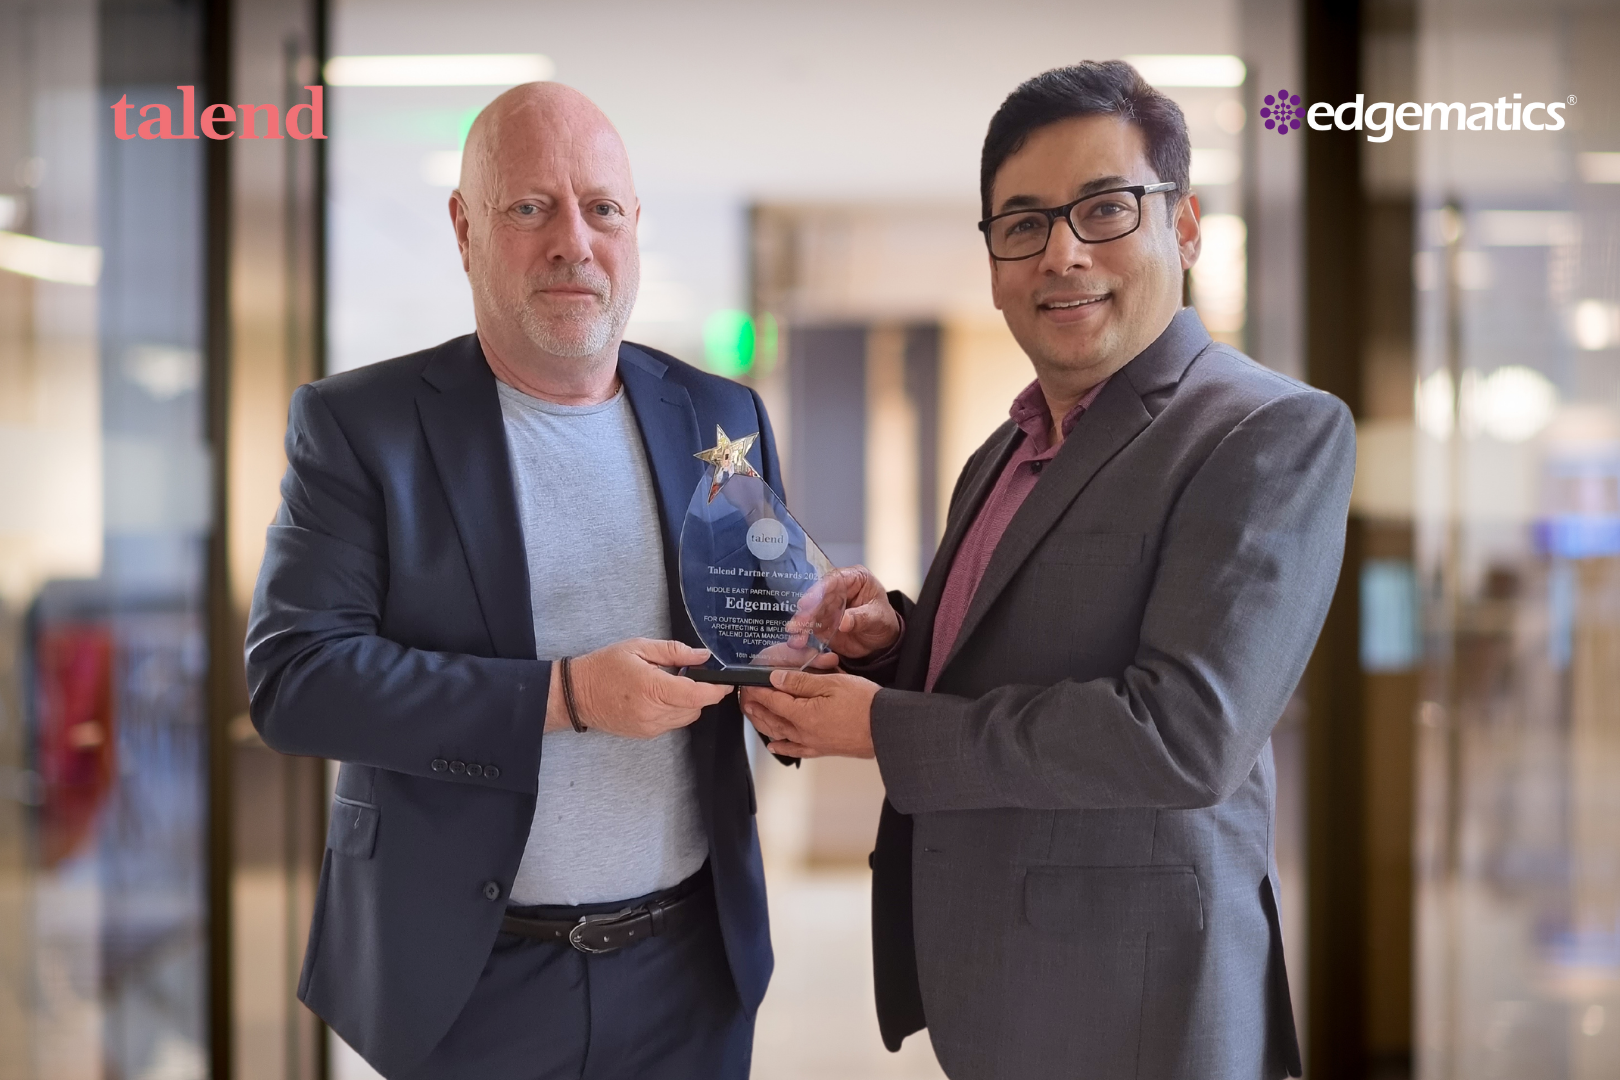 Edgematics is Talend Partner of the year in the Middle East